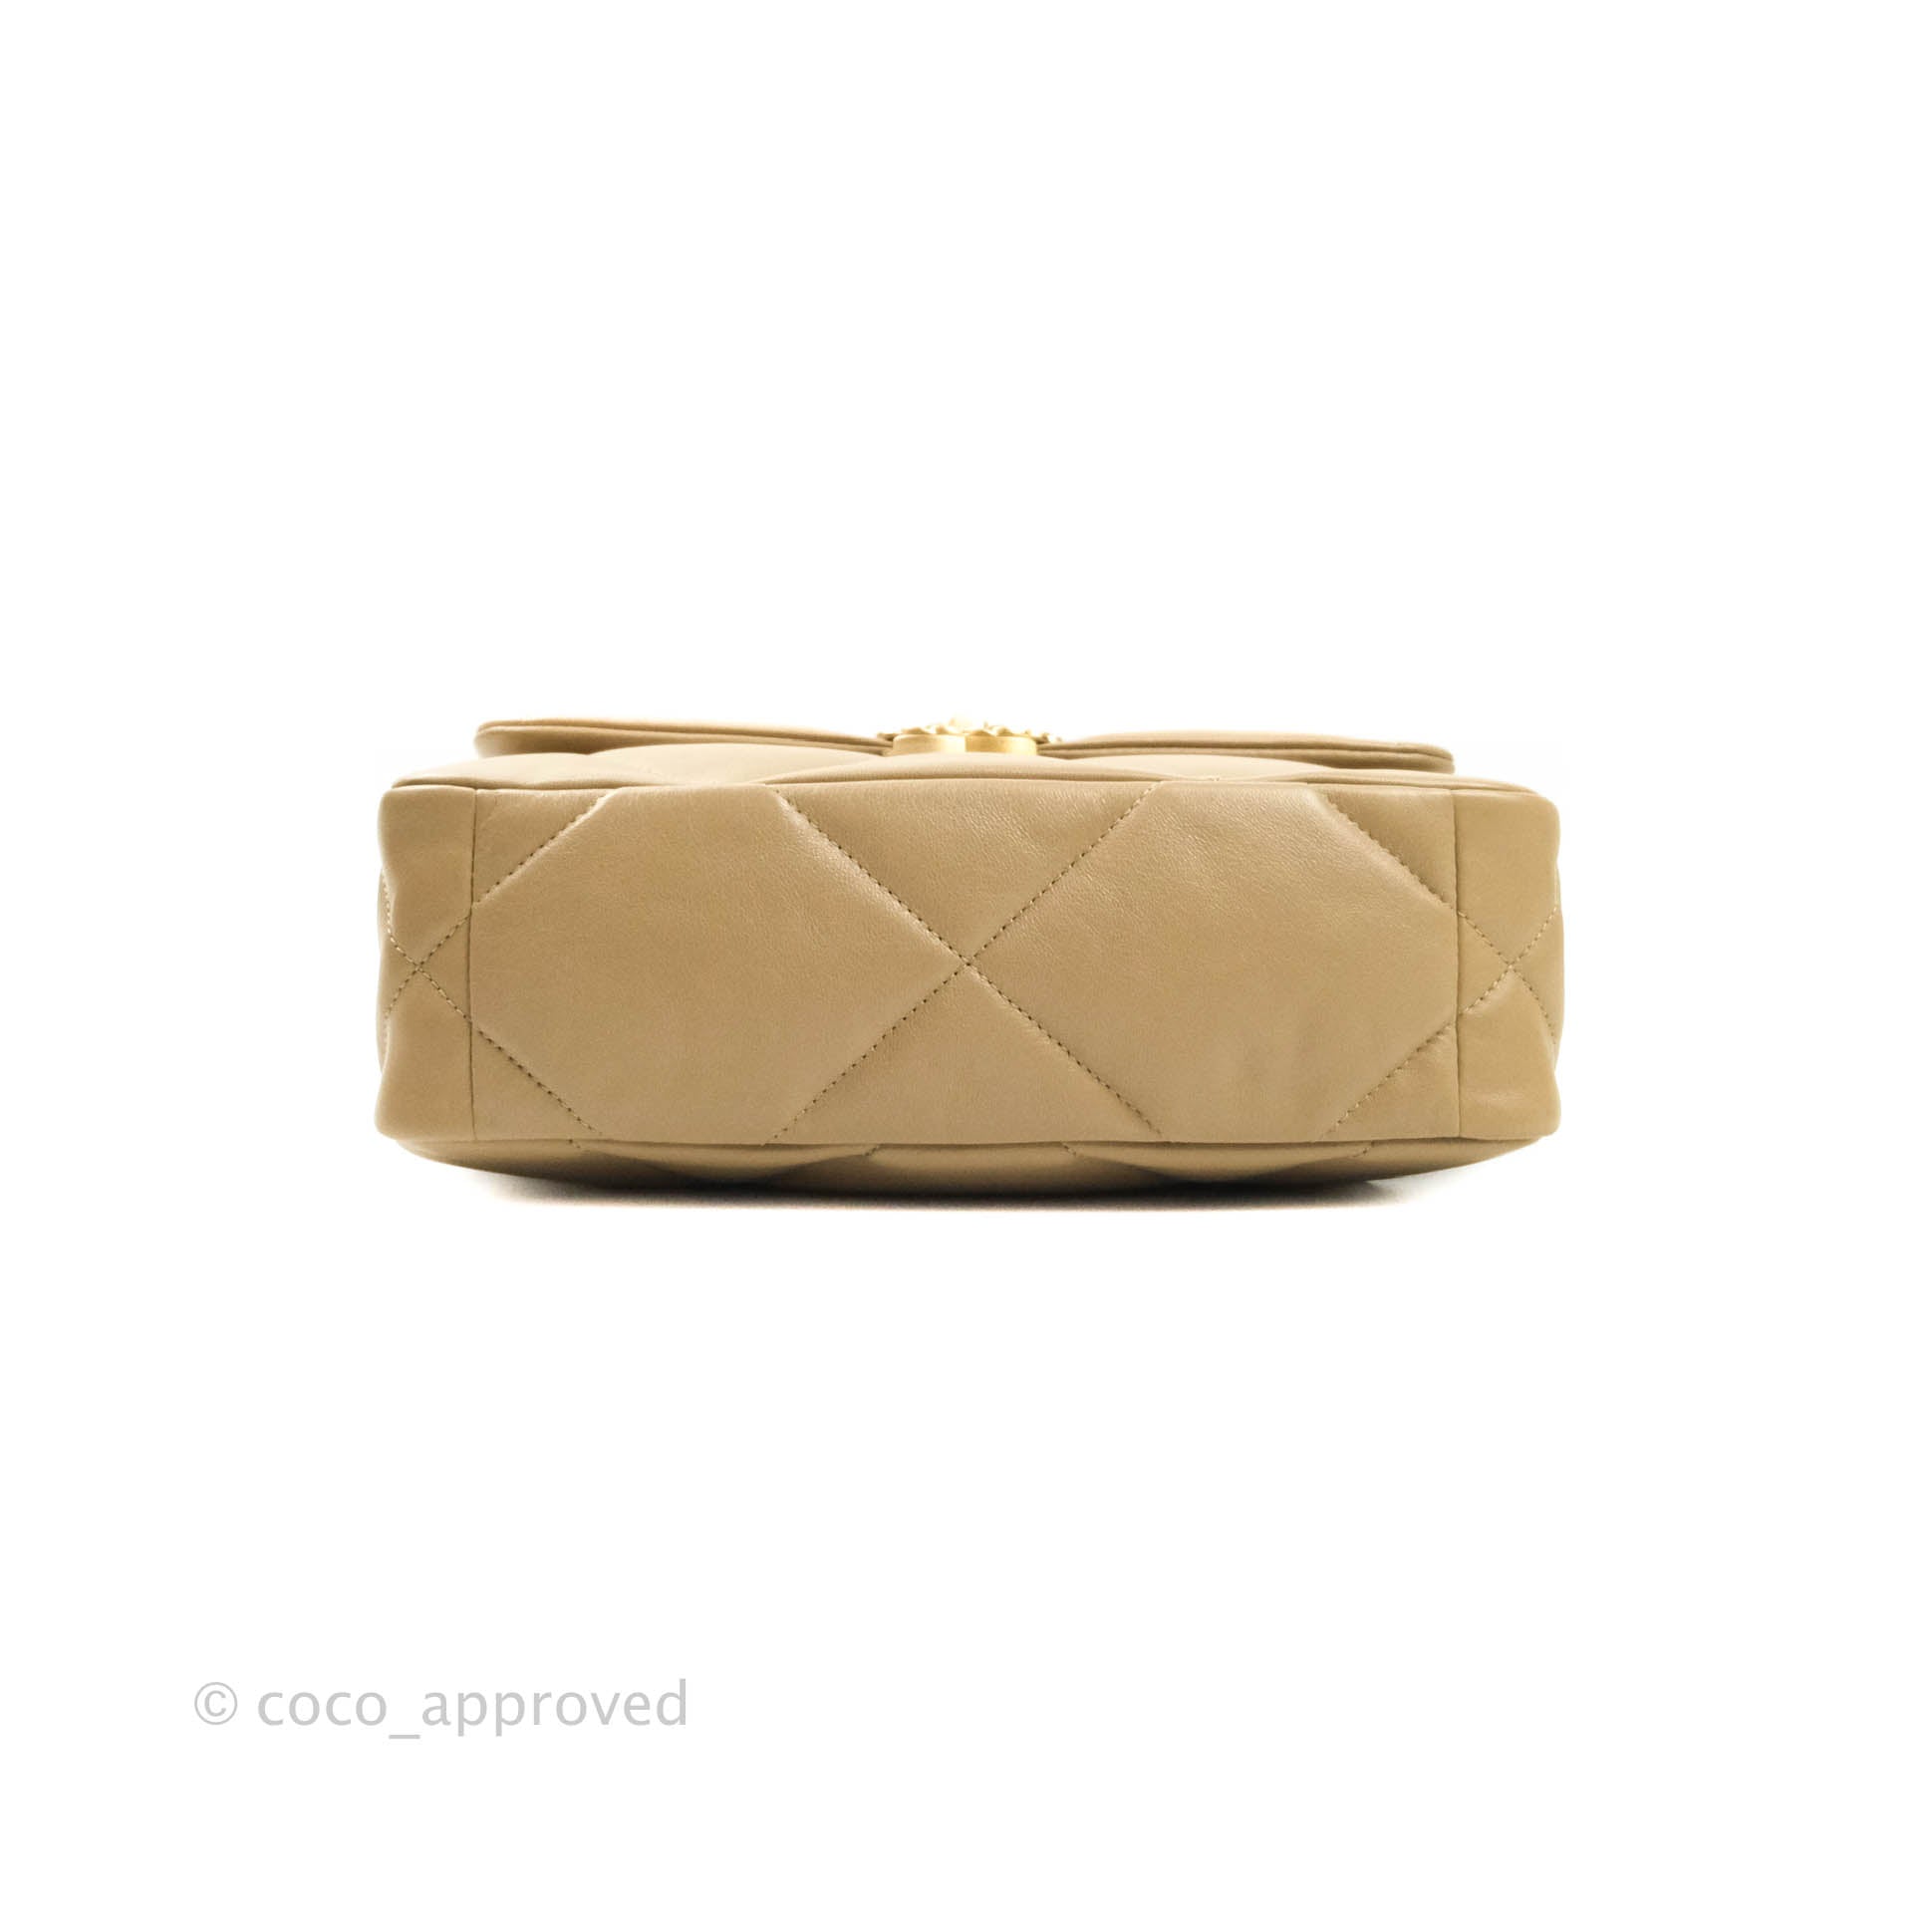 Chanel 19 Small Dark Beige Mixed Hardware 21S – Coco Approved Studio